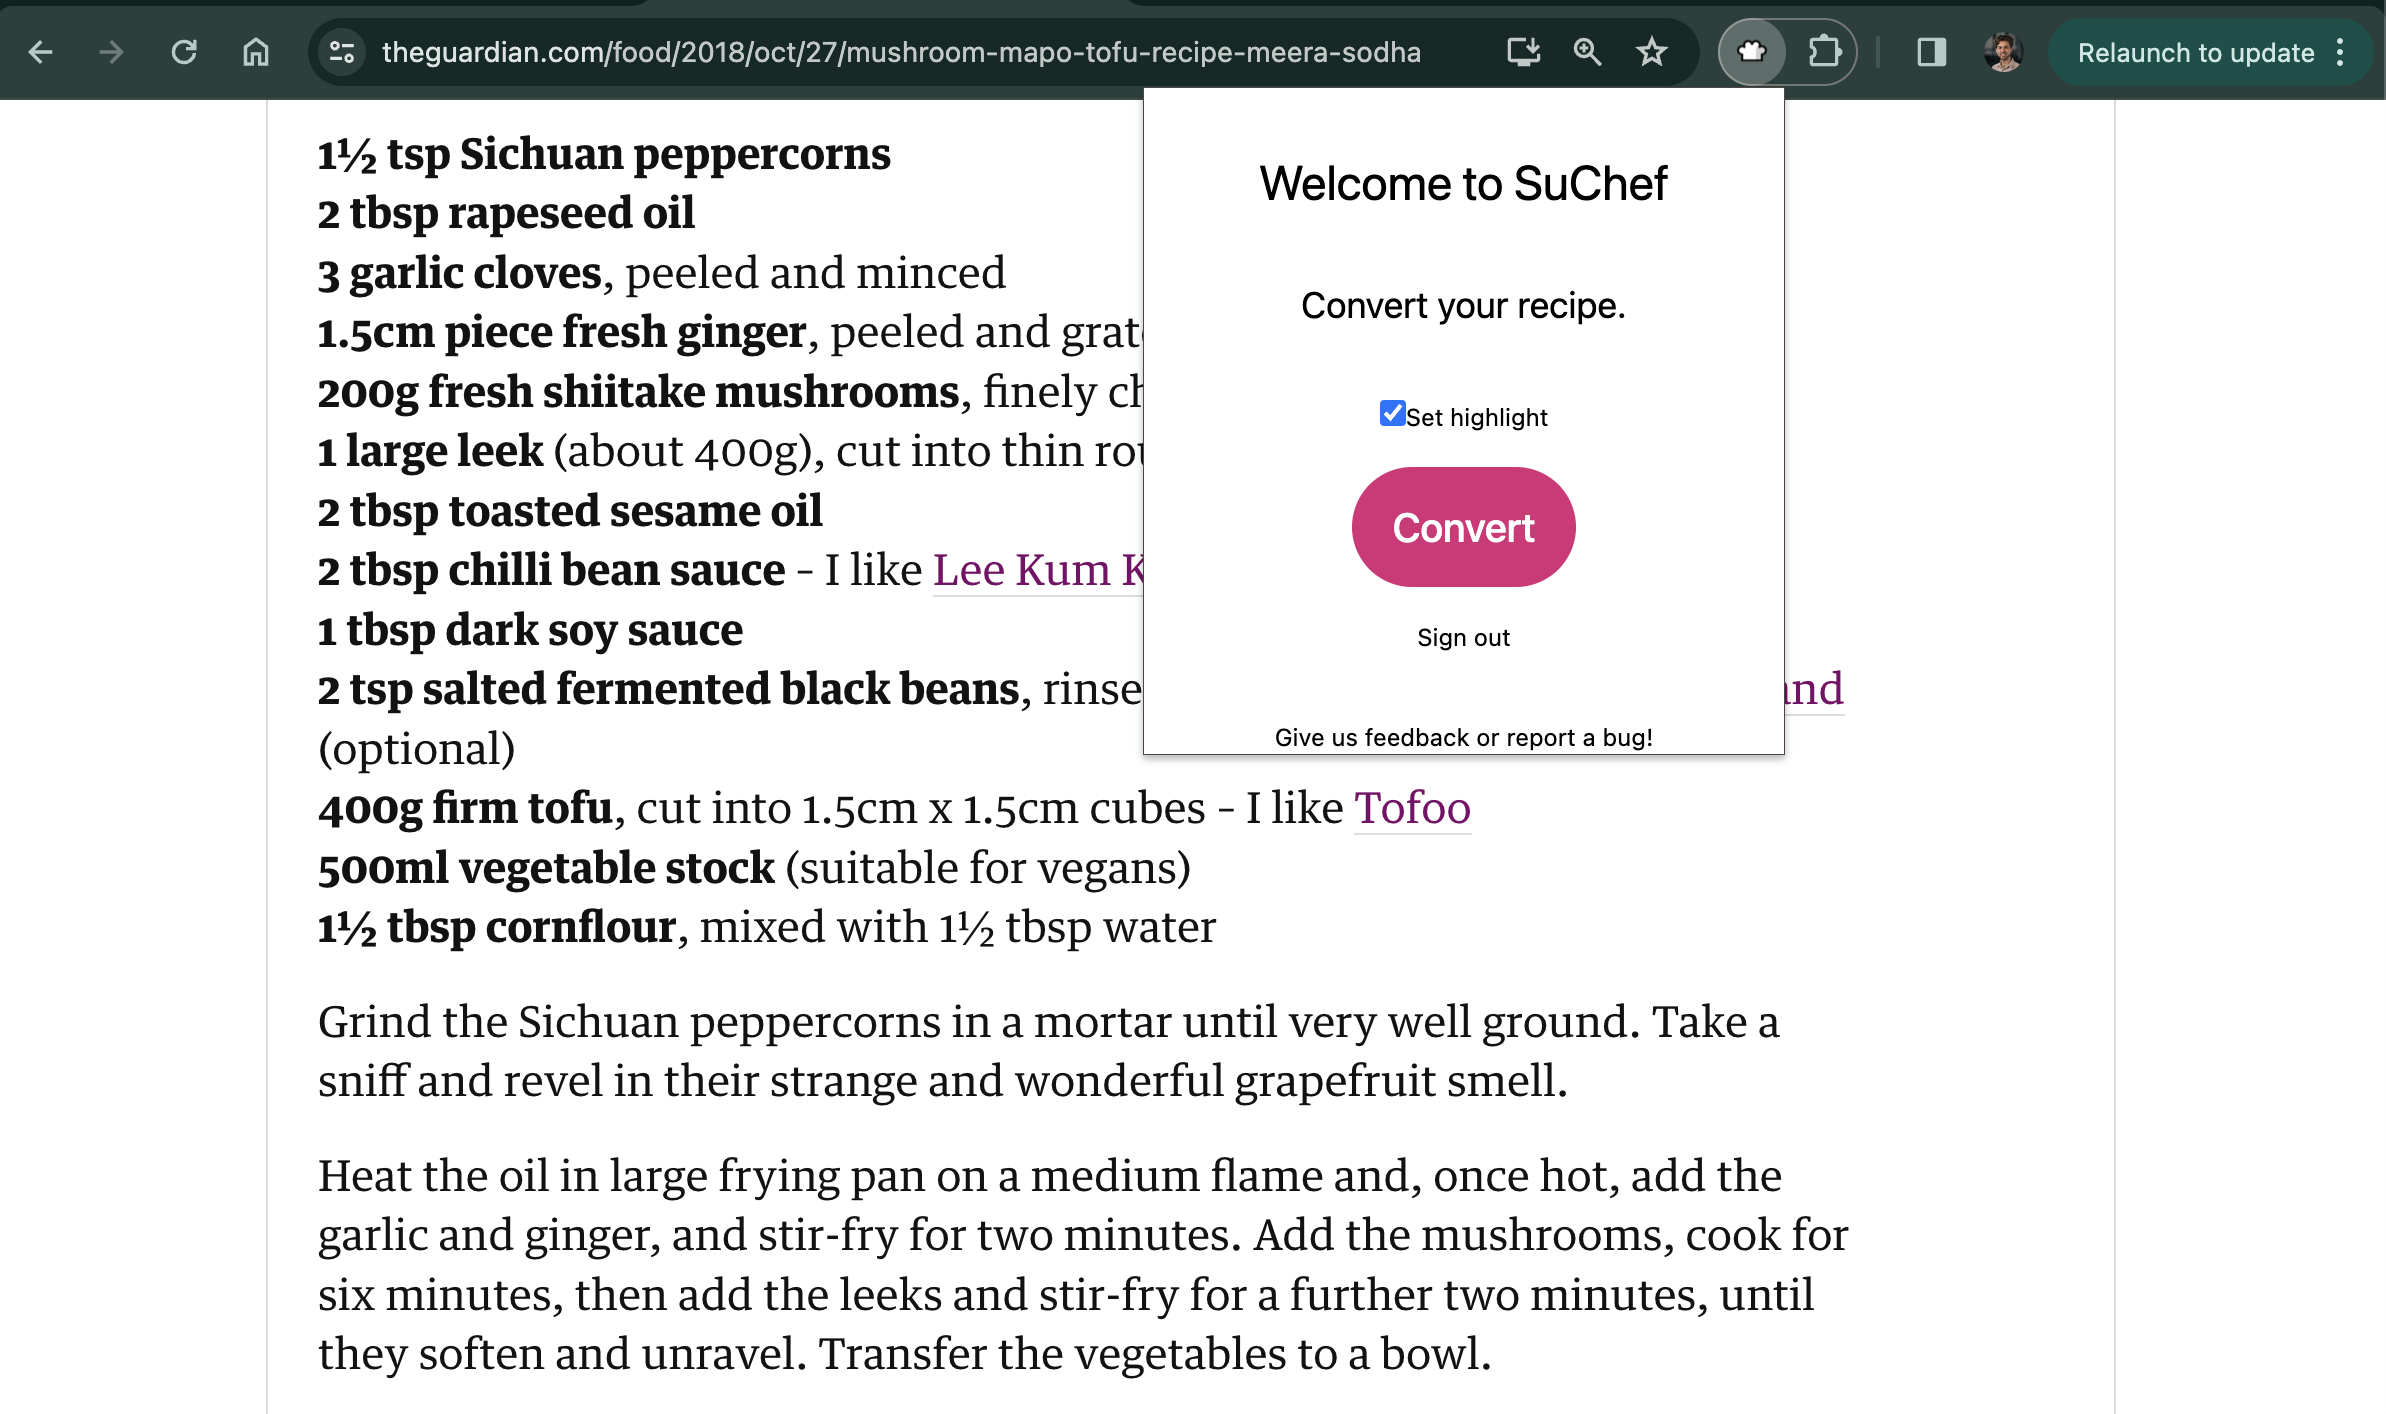 A screenshot of an example converted recipe